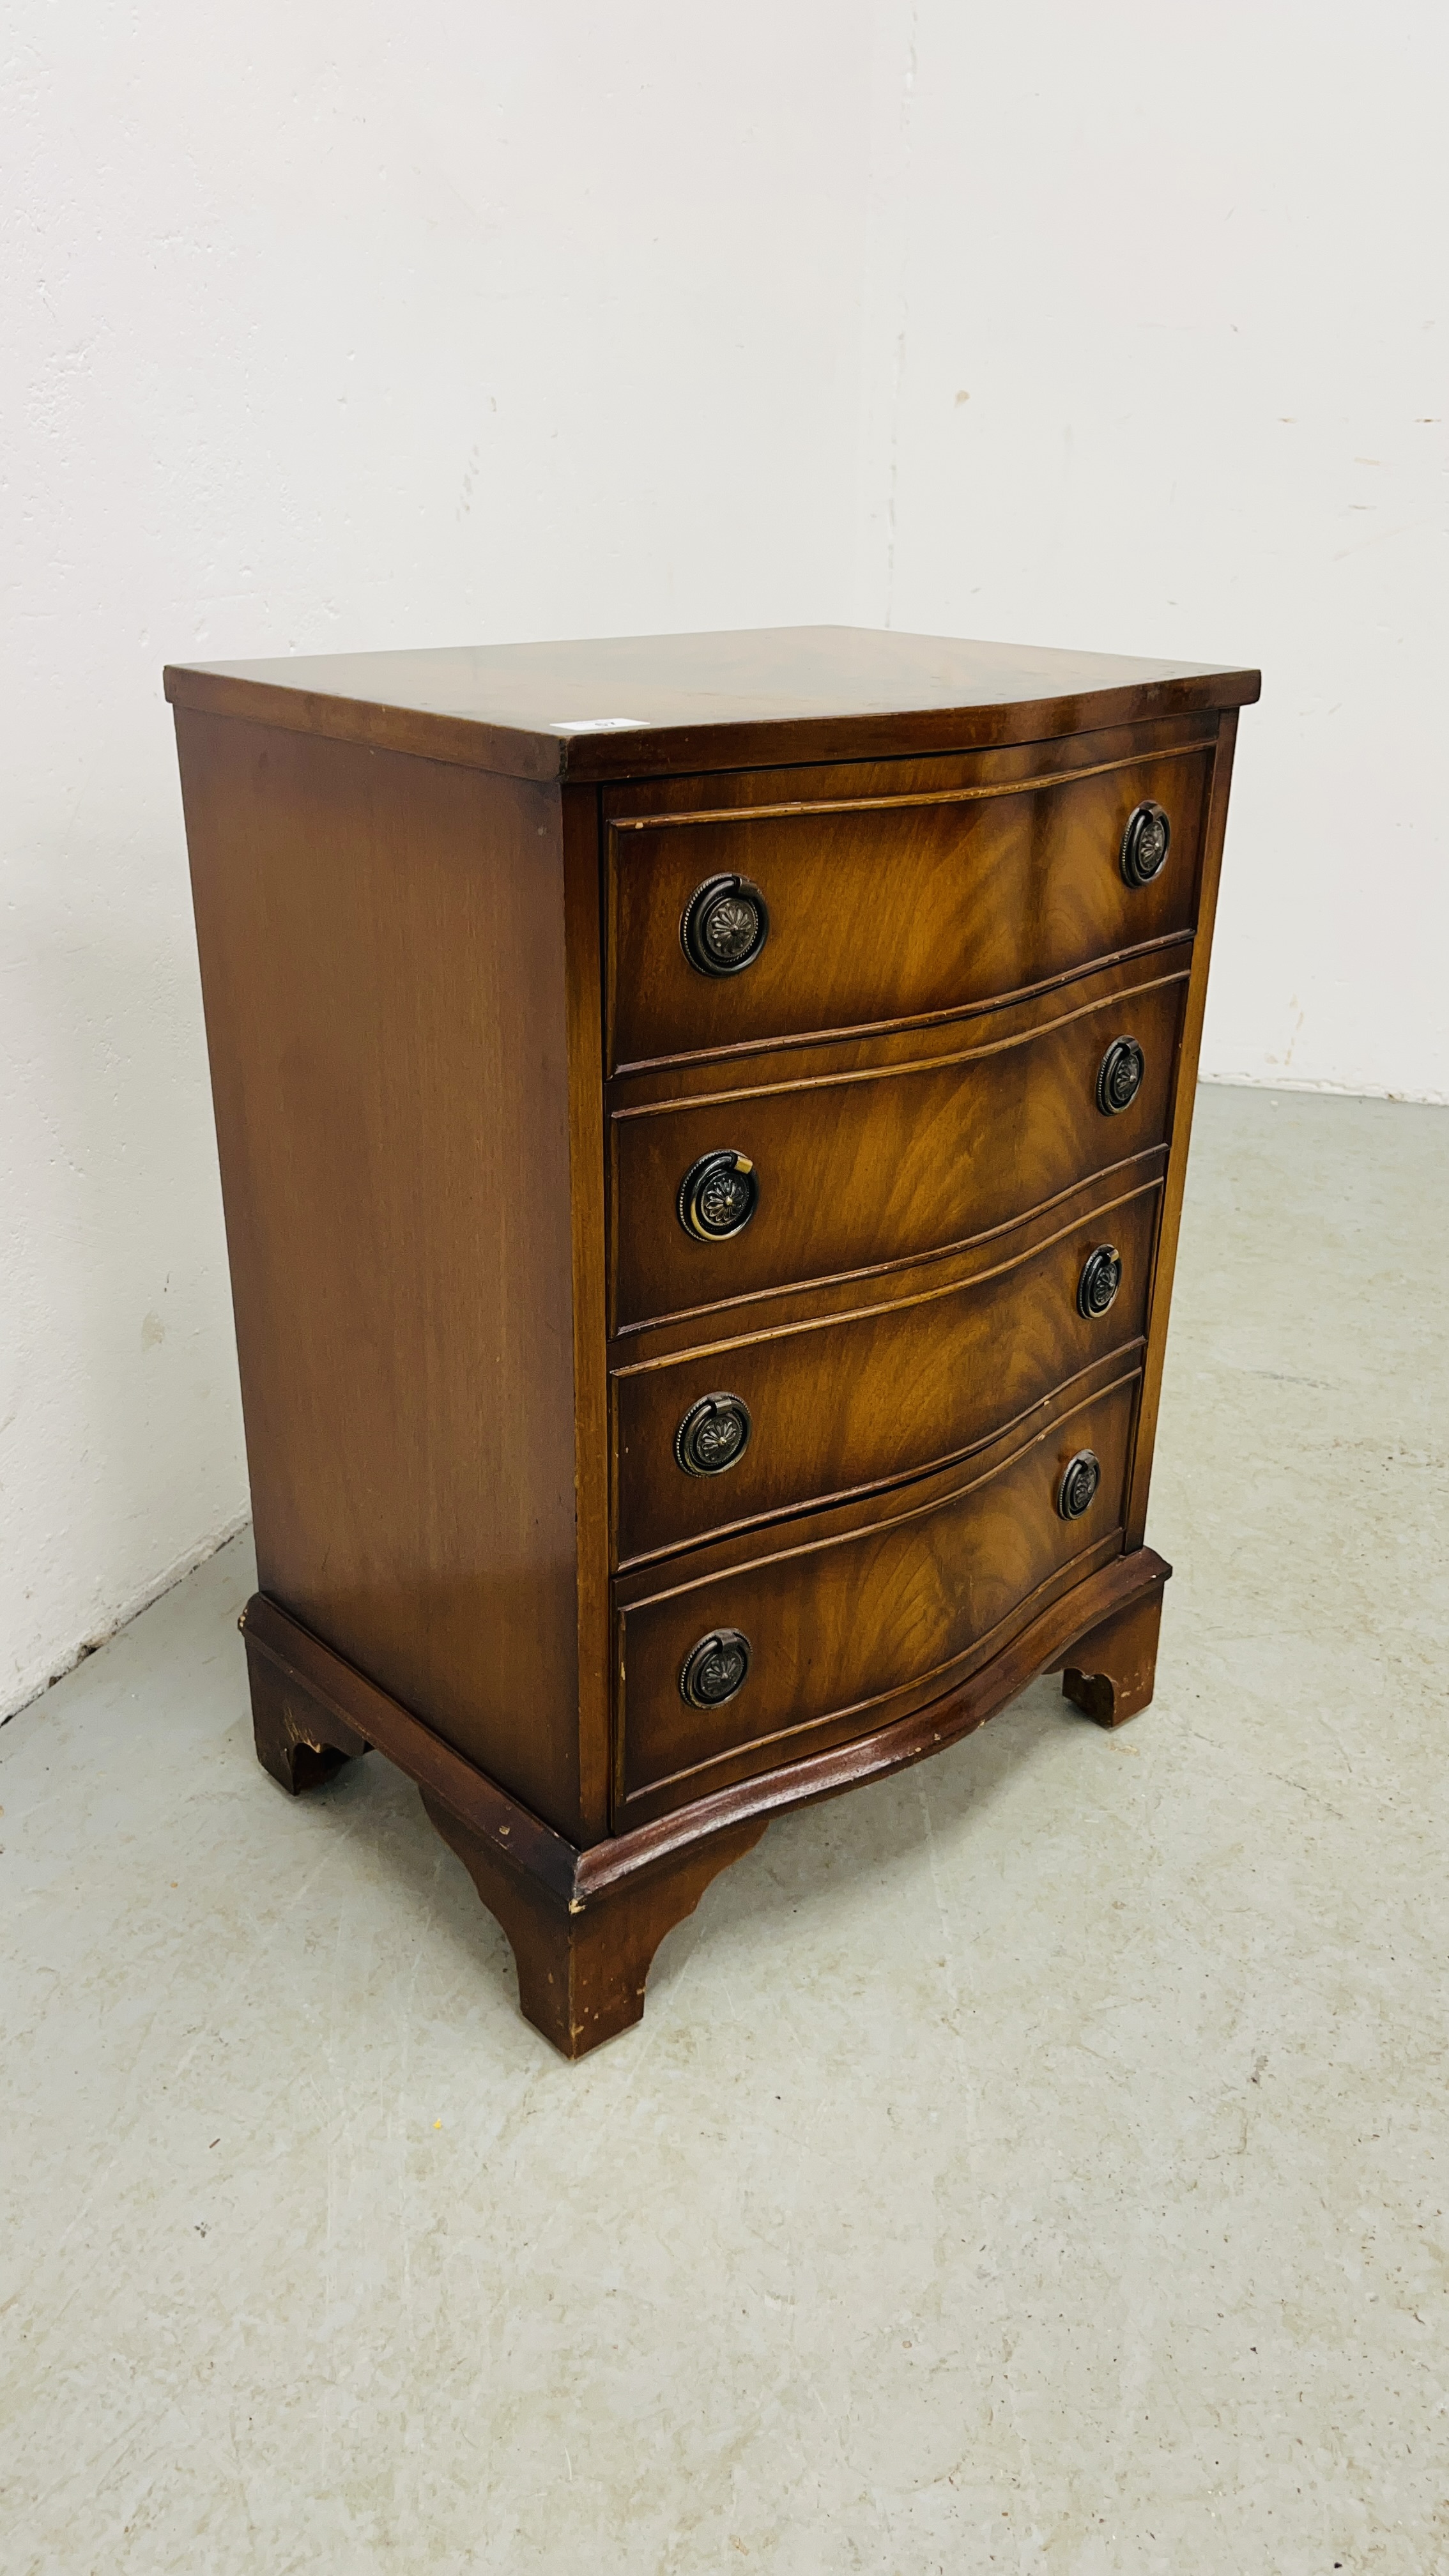 REPRODUCTION FLAME MAHOGANY FINISH FOUR DRAWER CHEST WIDTH 48CM. DEPTH 37CM. HEIGHT 69CM. - Image 5 of 6